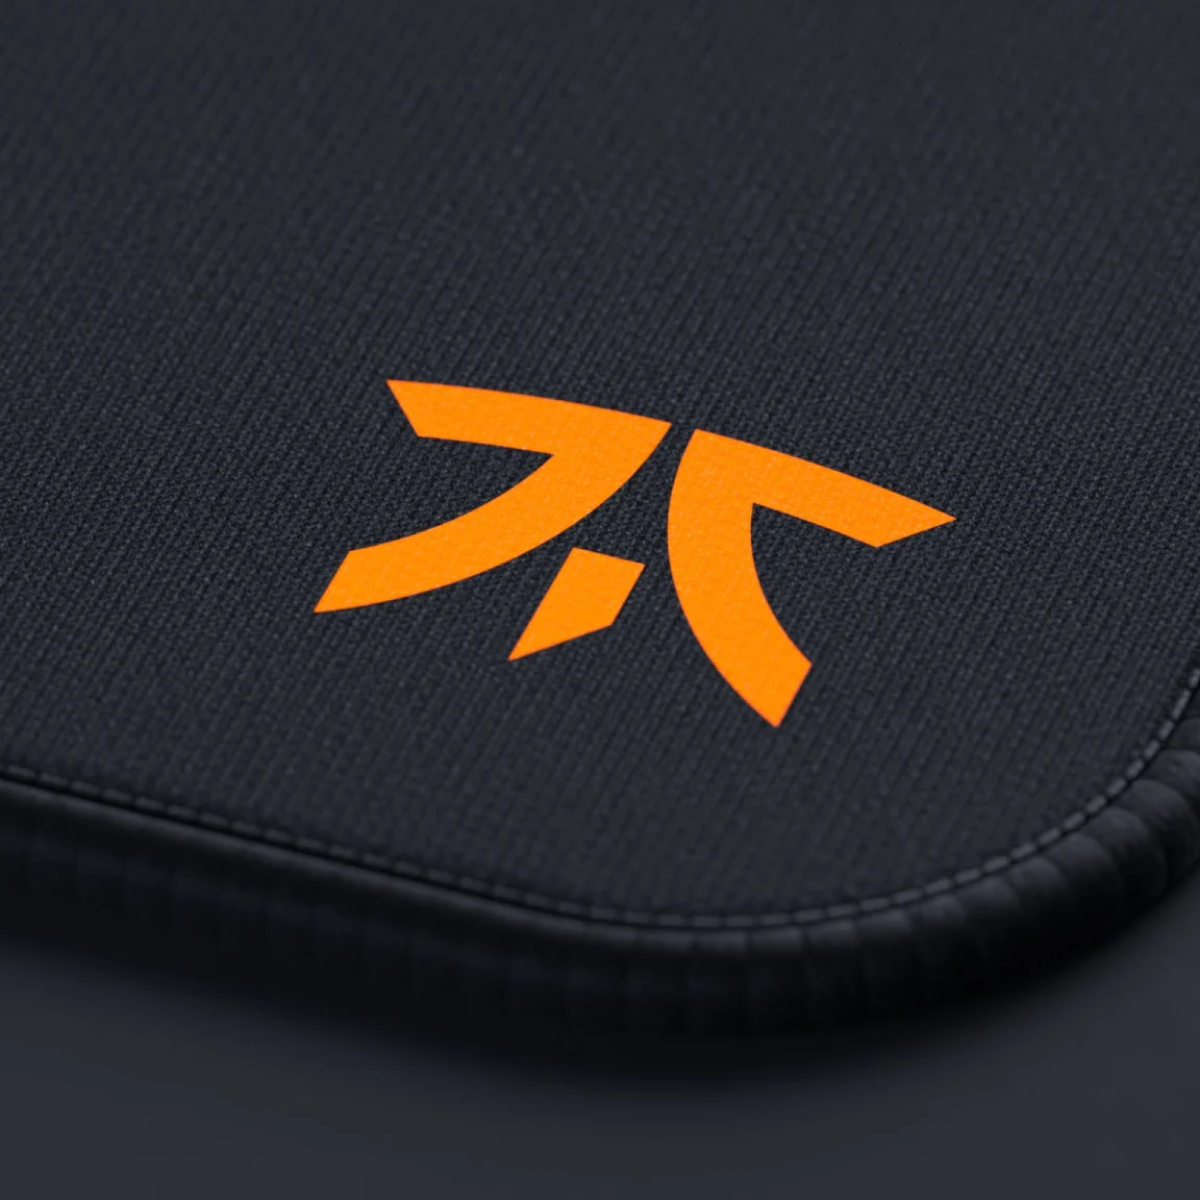 3 ACCESSOIRES PC GAMER FNATIC INCROYABLES 